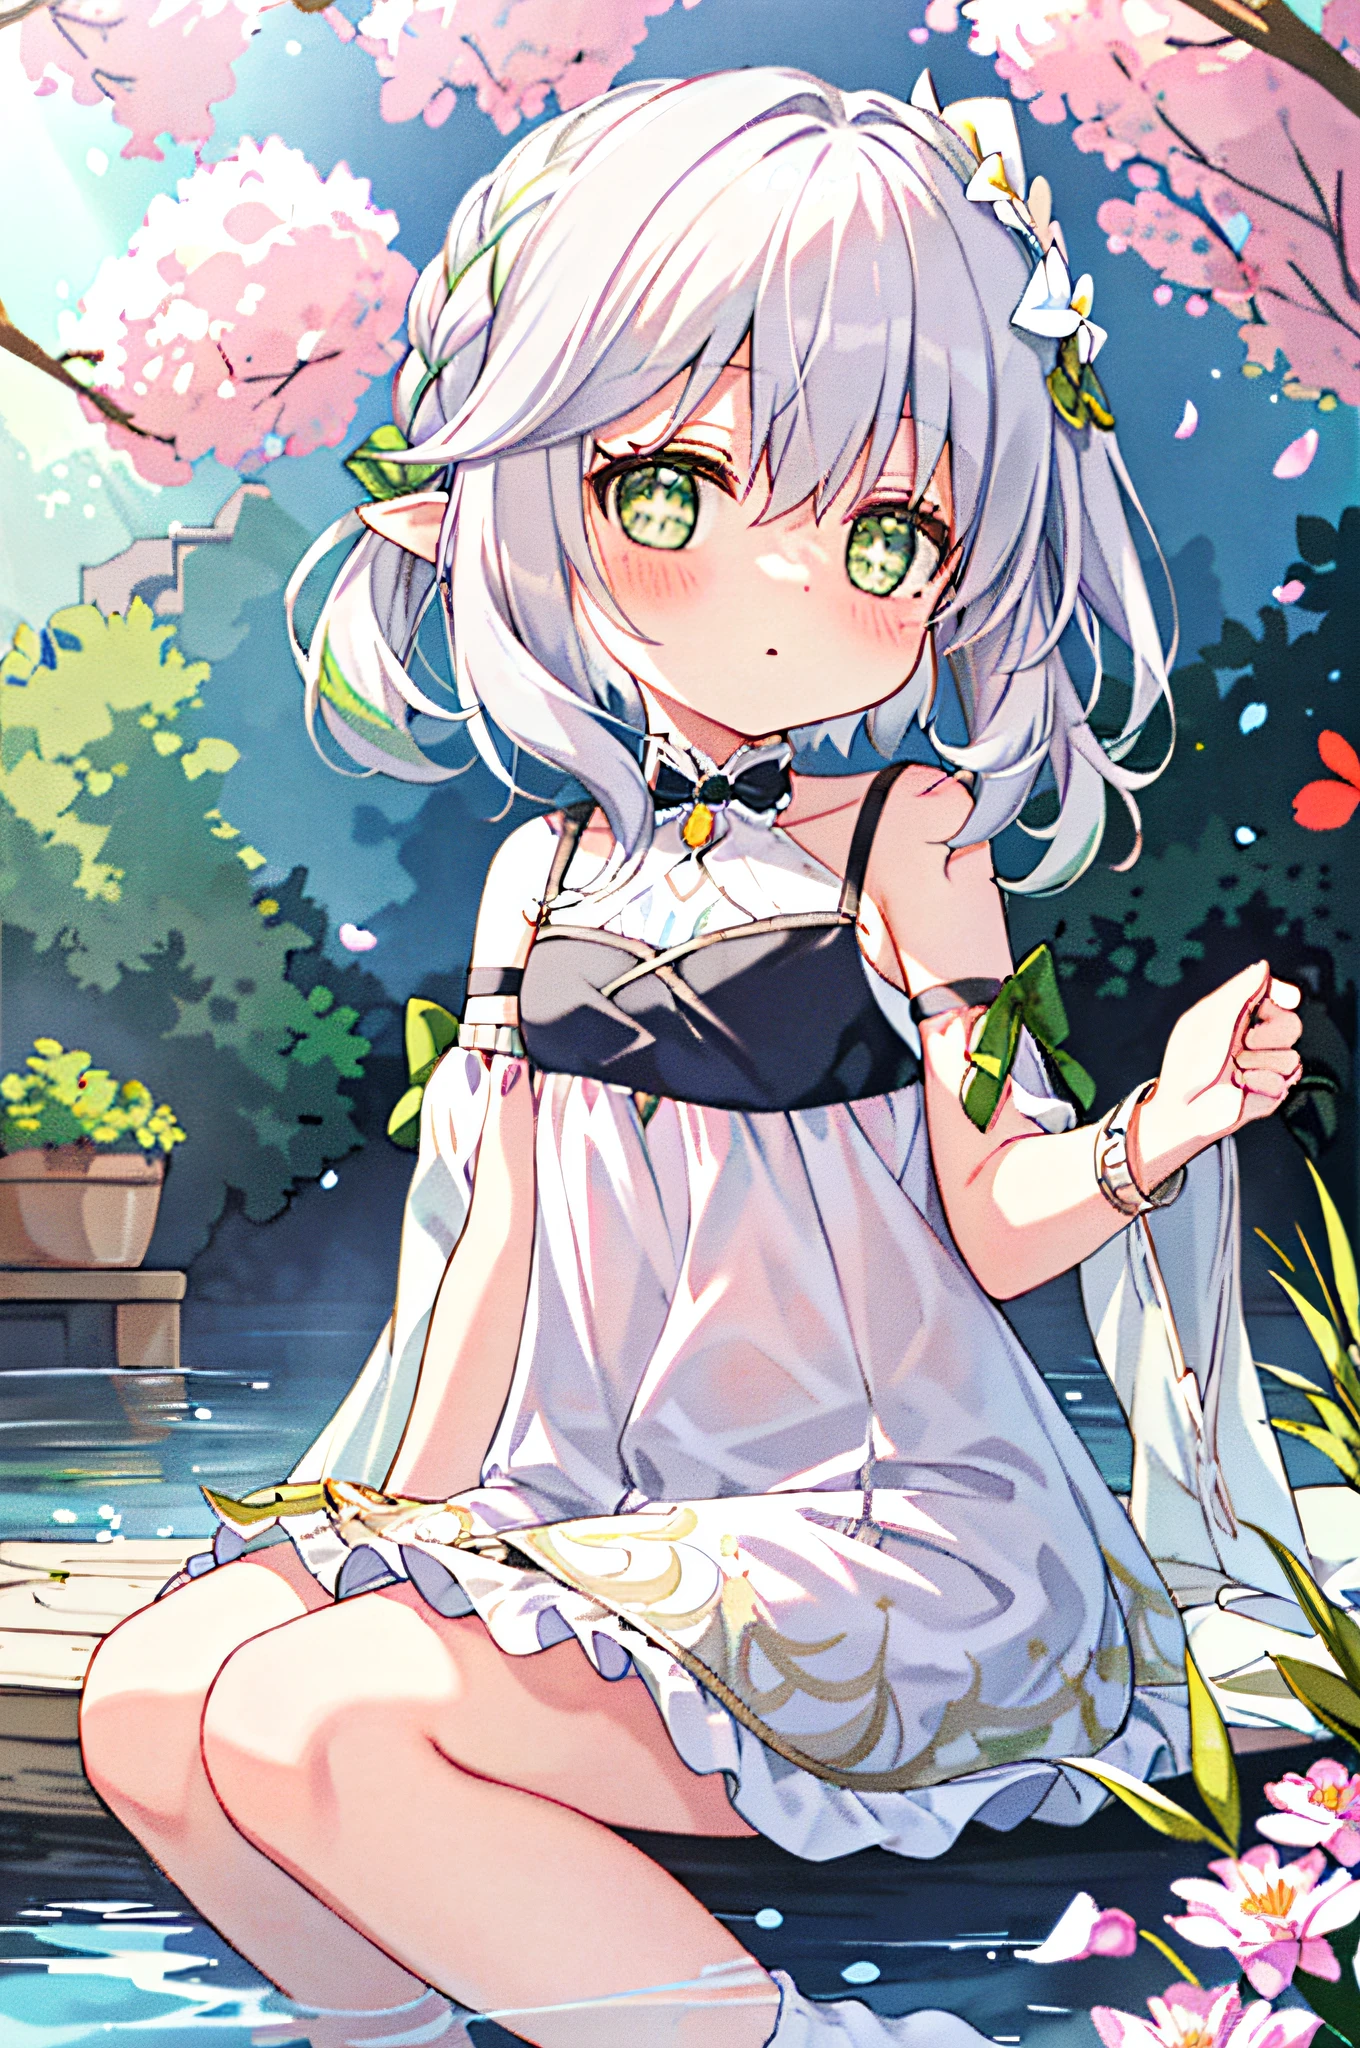 (sitting), (bow), (silver hair), (short hair), (light green eyes), hreat in the eyes, (four-petaled white flower hair ornament: 1.1), (blush), bangs, (a girl in [(nightgown):(((without socks))): 0.4] : 1.2), (bare shoulder), clavicle, (white thighs: 1.2), frilly sleeves, looking at the viewer, [(night: 1.2), peaceful, sky, ((full moon)),stars, house, city, (in a courtyard), water drop,pond,(near pond), tree, flower request, wind: : 0.6 ], (lridescent light refraction), (floating pink petals: 1.2), dreamer